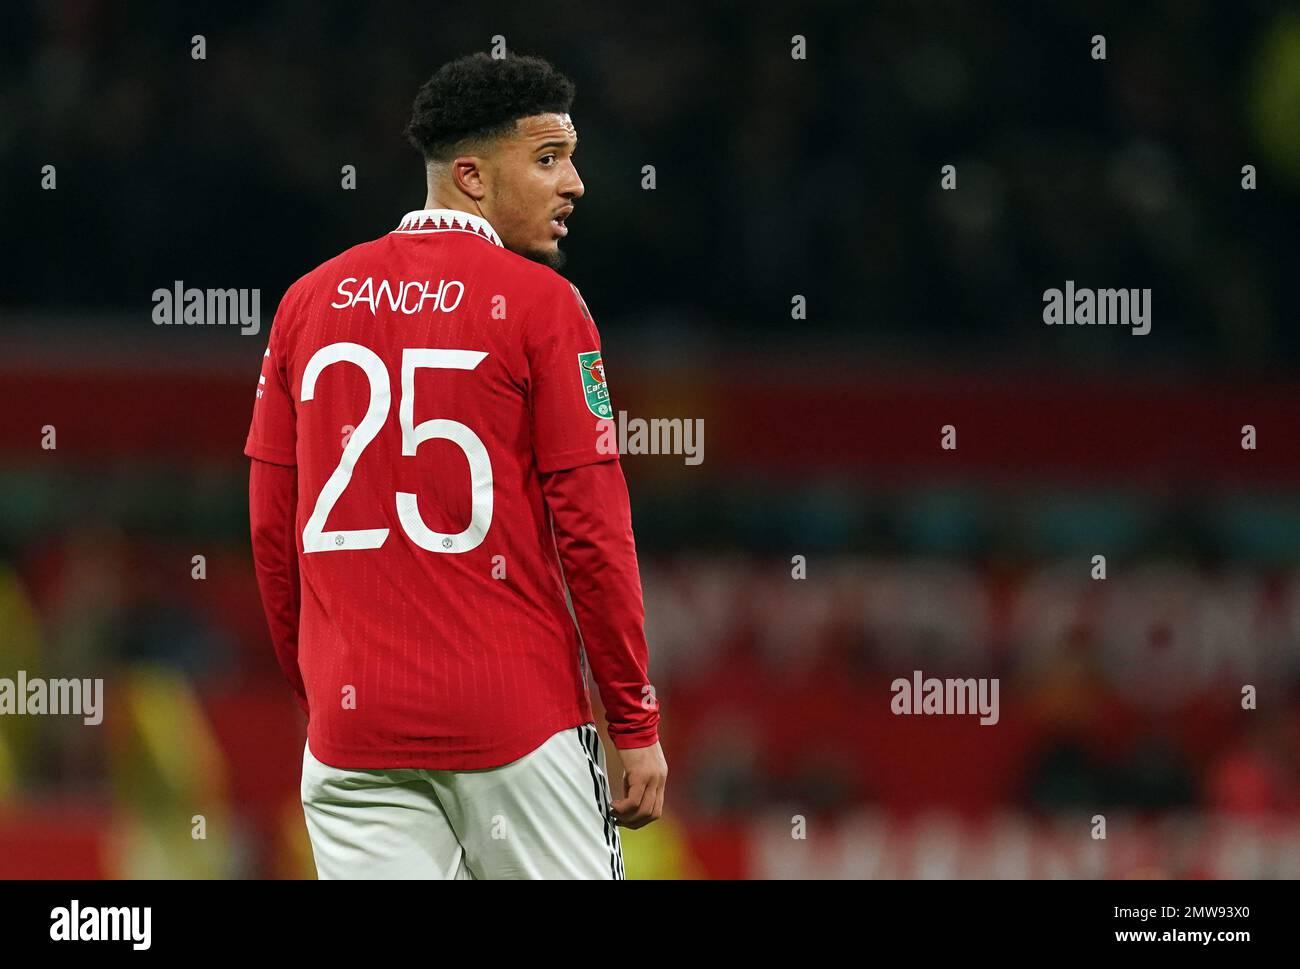 Manchester United S Jadon Sancho During The Carabao Cup Semi Final